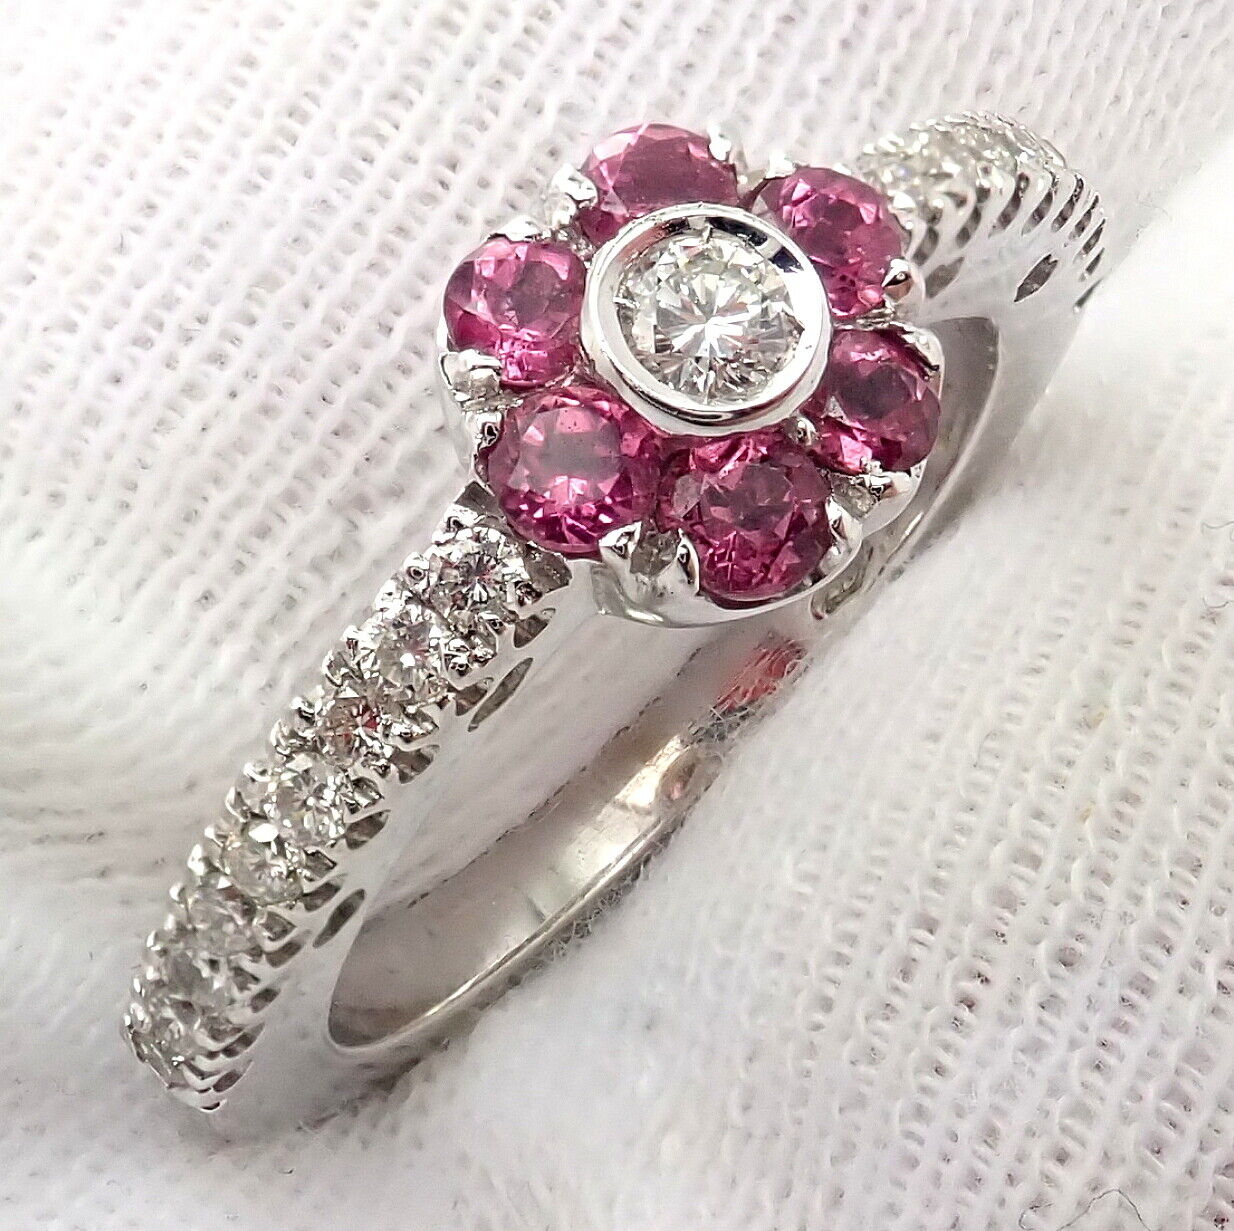 PASQUALE BRUNI Jewelry & Watches:Fine Jewelry:Rings Authentic! Pasquale Bruni 18k White Gold Diamond Pink Sapphire Flower Fiori Ring